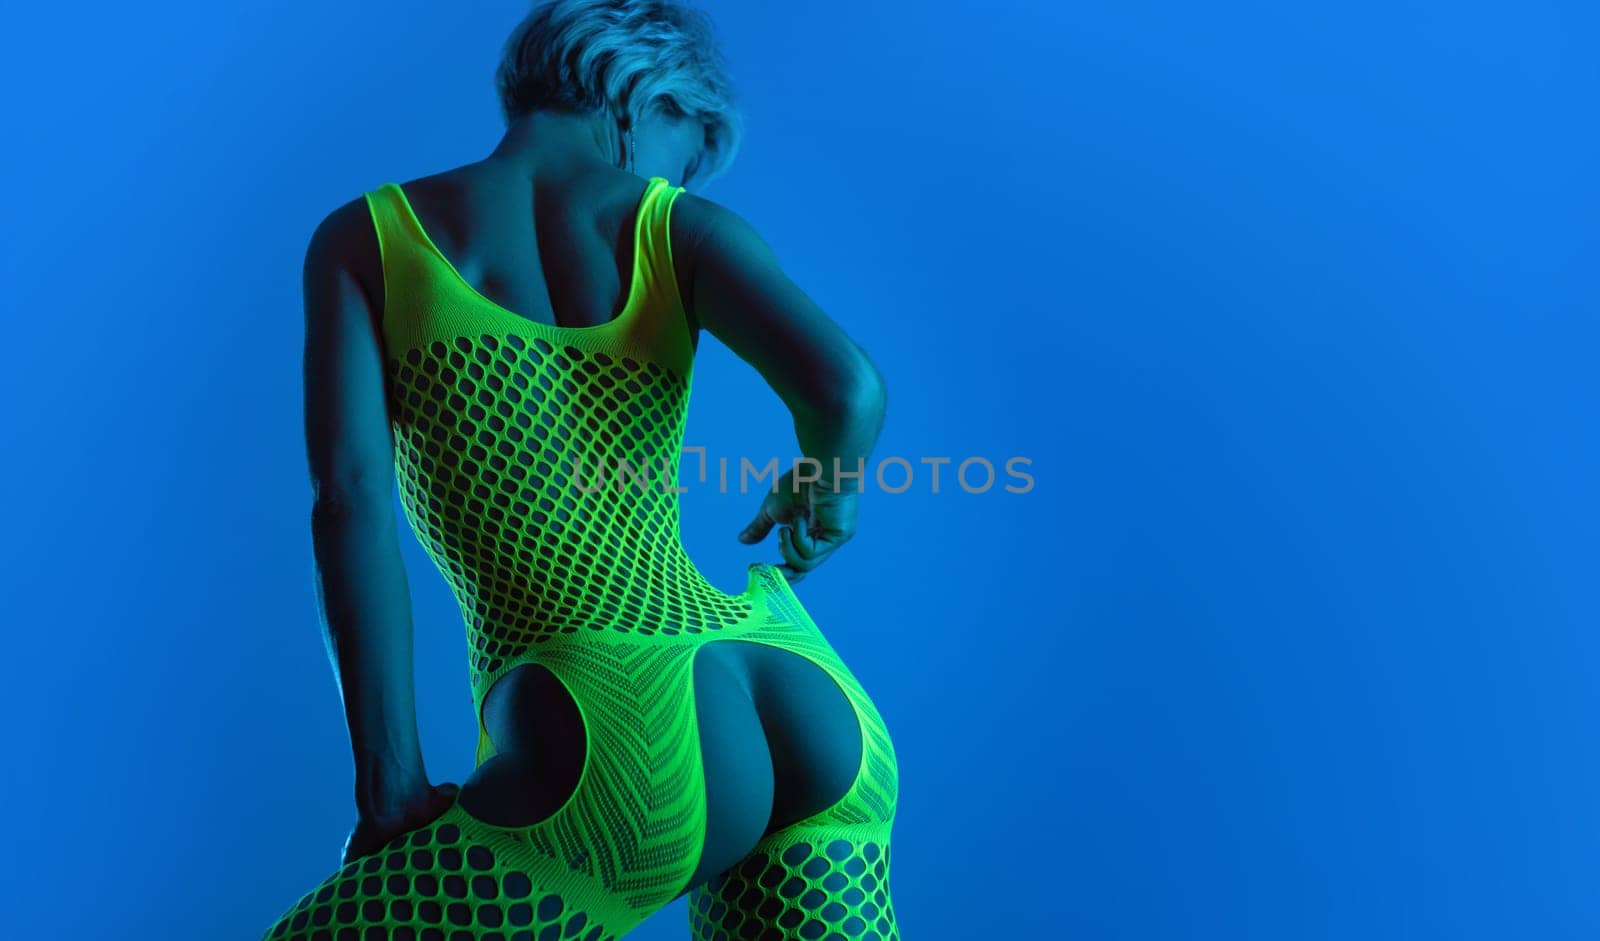 hot girl in erotic lingerie, a mesh bodysuit with an open crotch sexually poses with buttocks for a sex shop in neon blue light against a background of copy paste